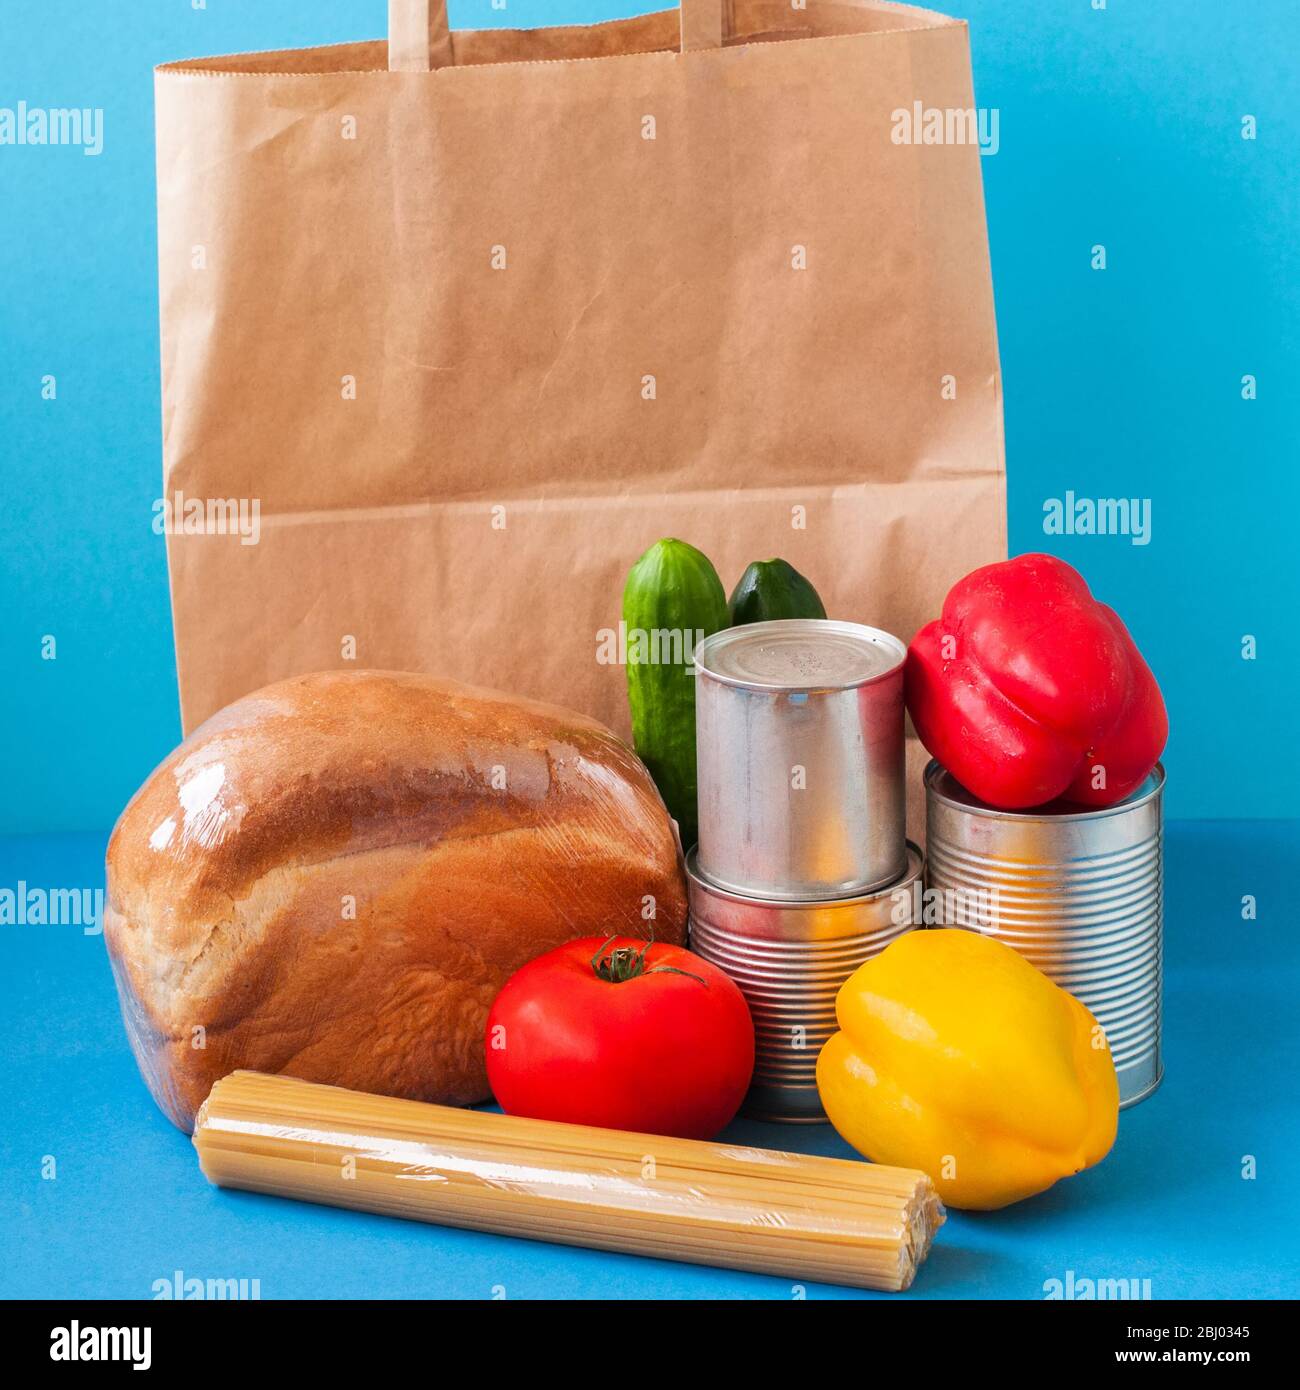 Paper bag with food supplies on blue background.  Stock Photo